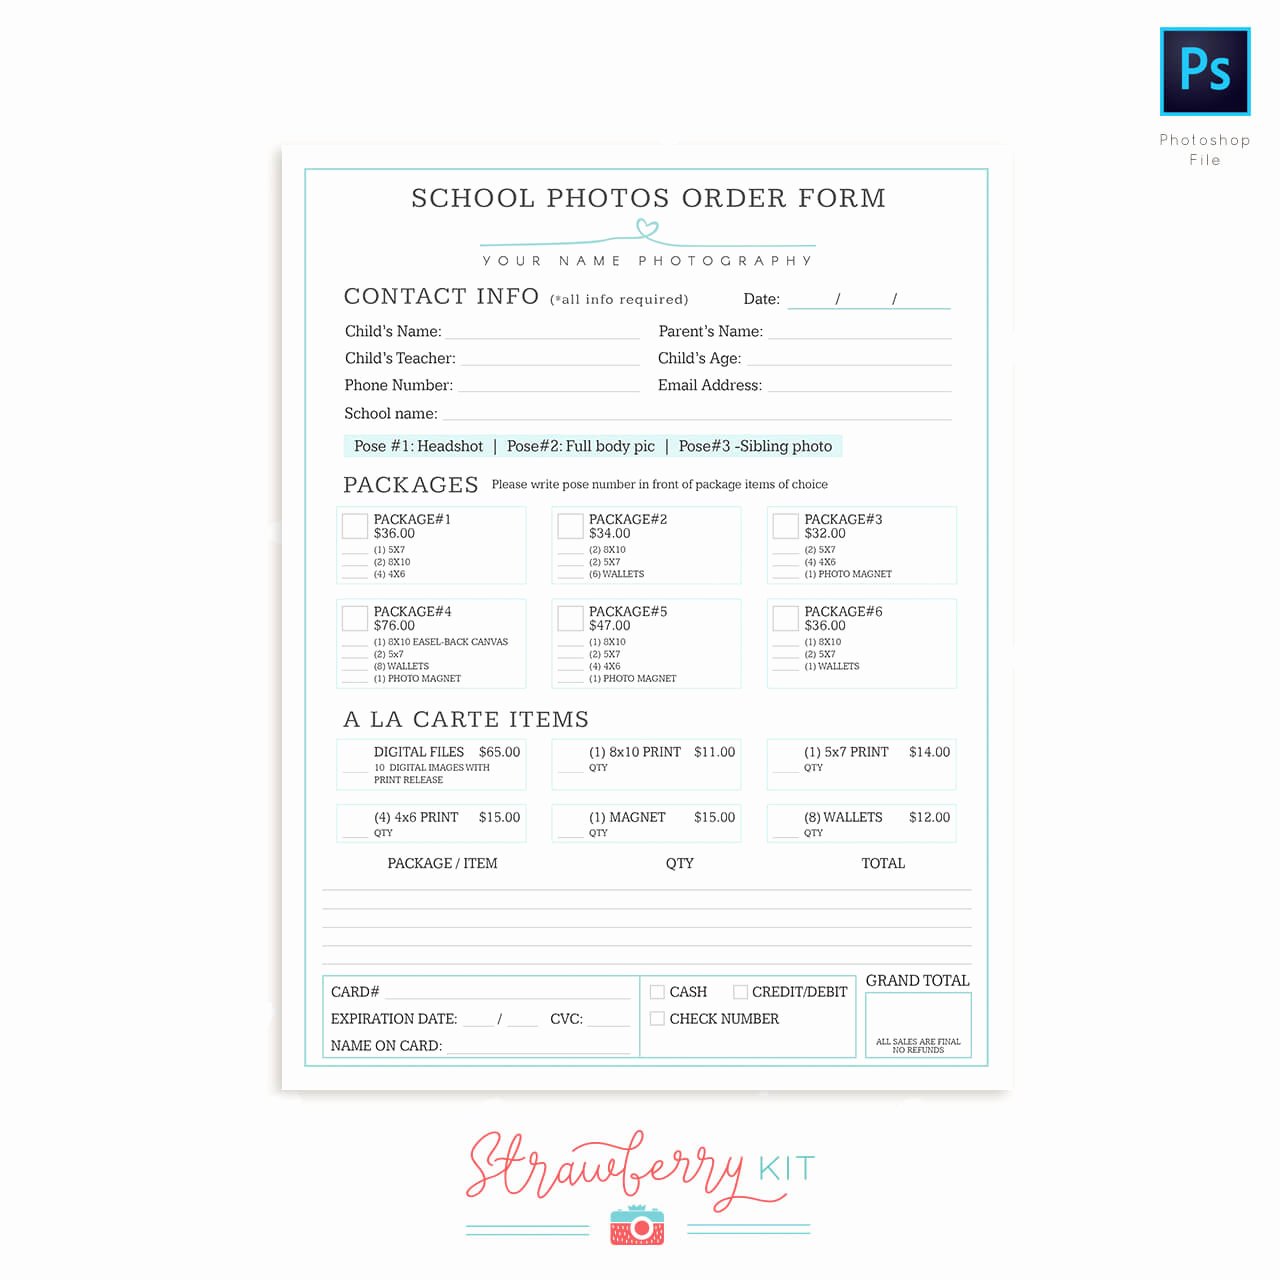 Photography order form Template Free New School Photography order form Template Strawberry Kit